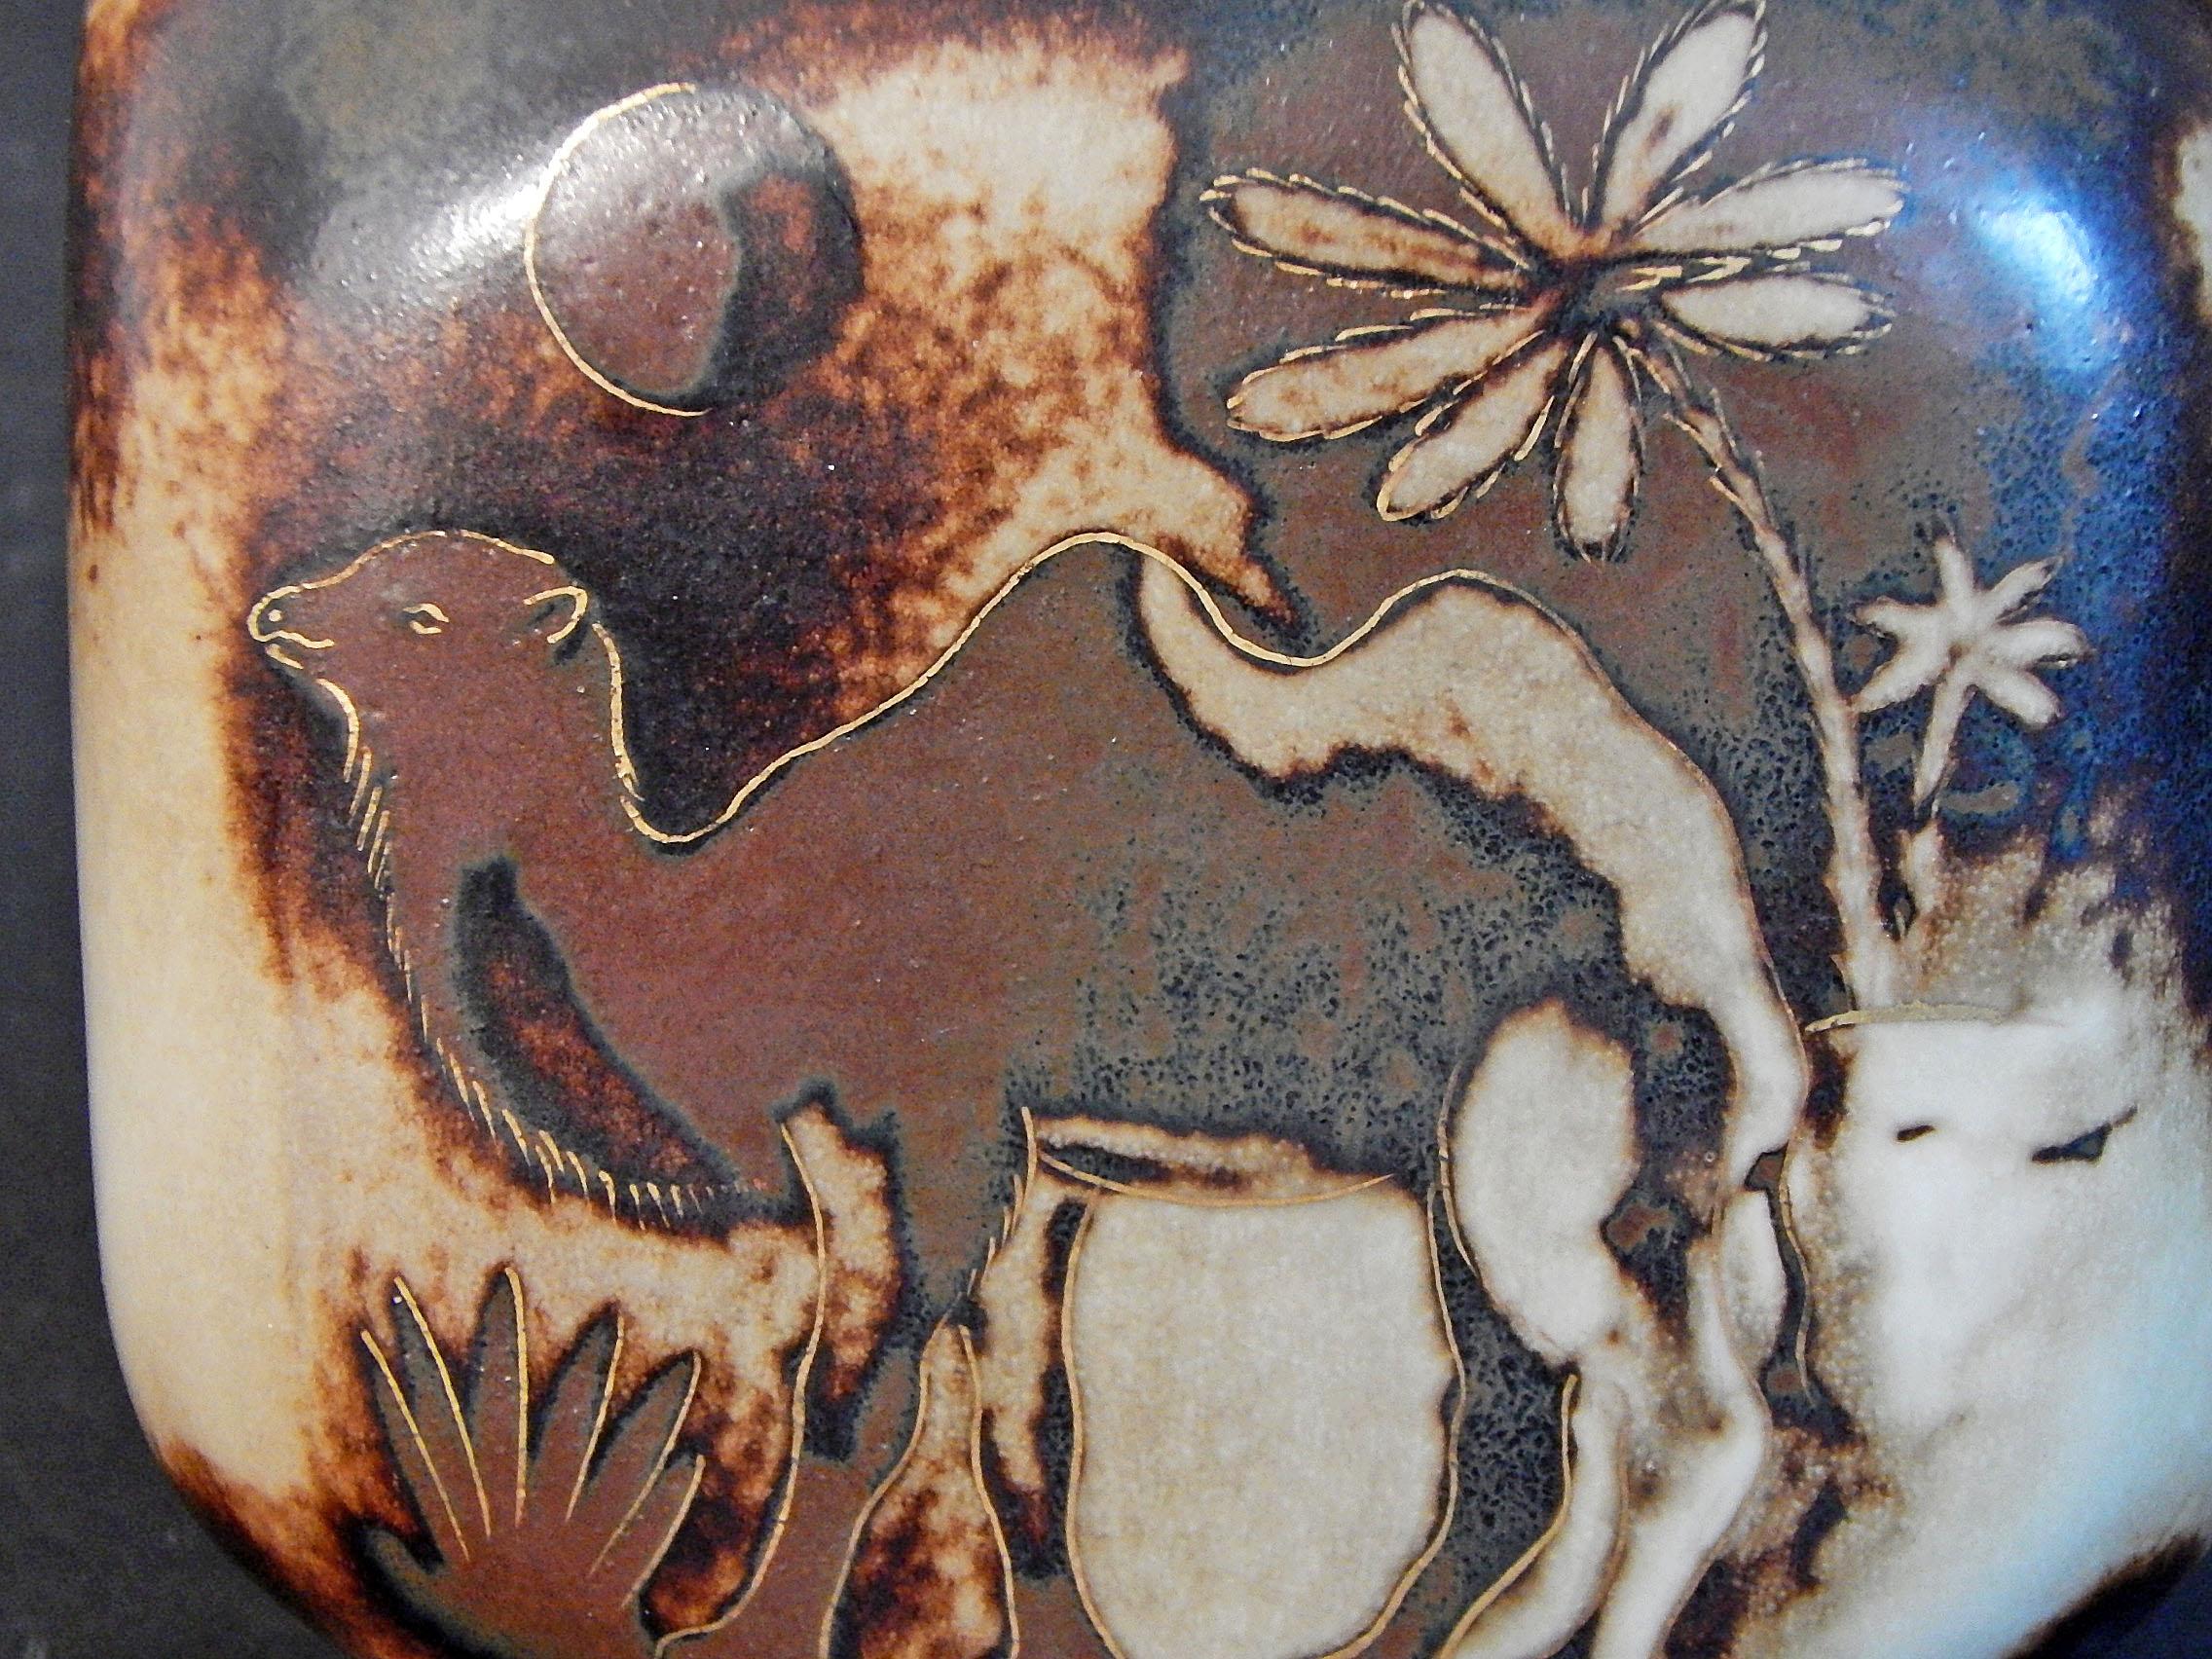 Beautifully glazed in shades of brown, ivory and gold, this striking vase depicts bactrian, two-hump camels flanked by palm trees, in a lovely moonlit night. This piece was designed by Gunnar Nylund for Rorstrand pottery in Sweden. Before he became